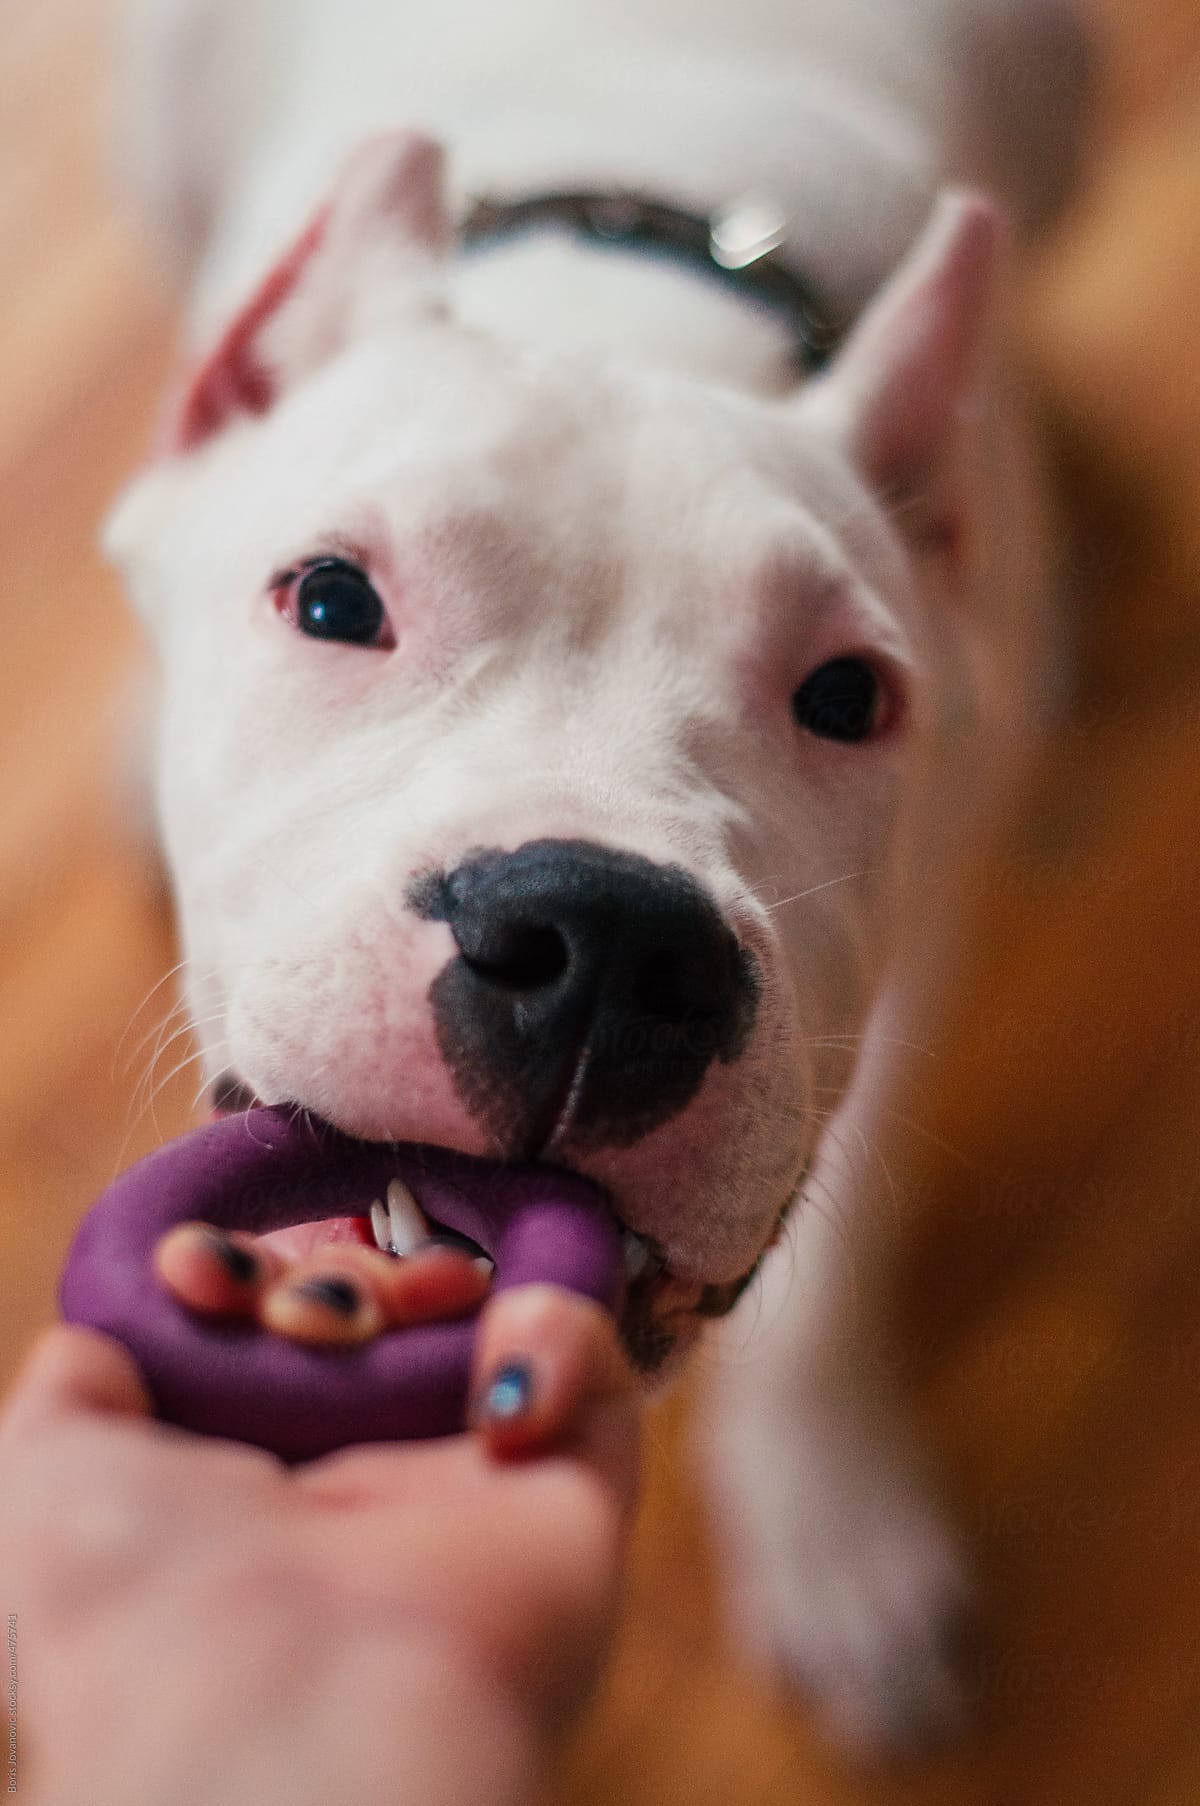 Dogo Argentino playing with pet toy